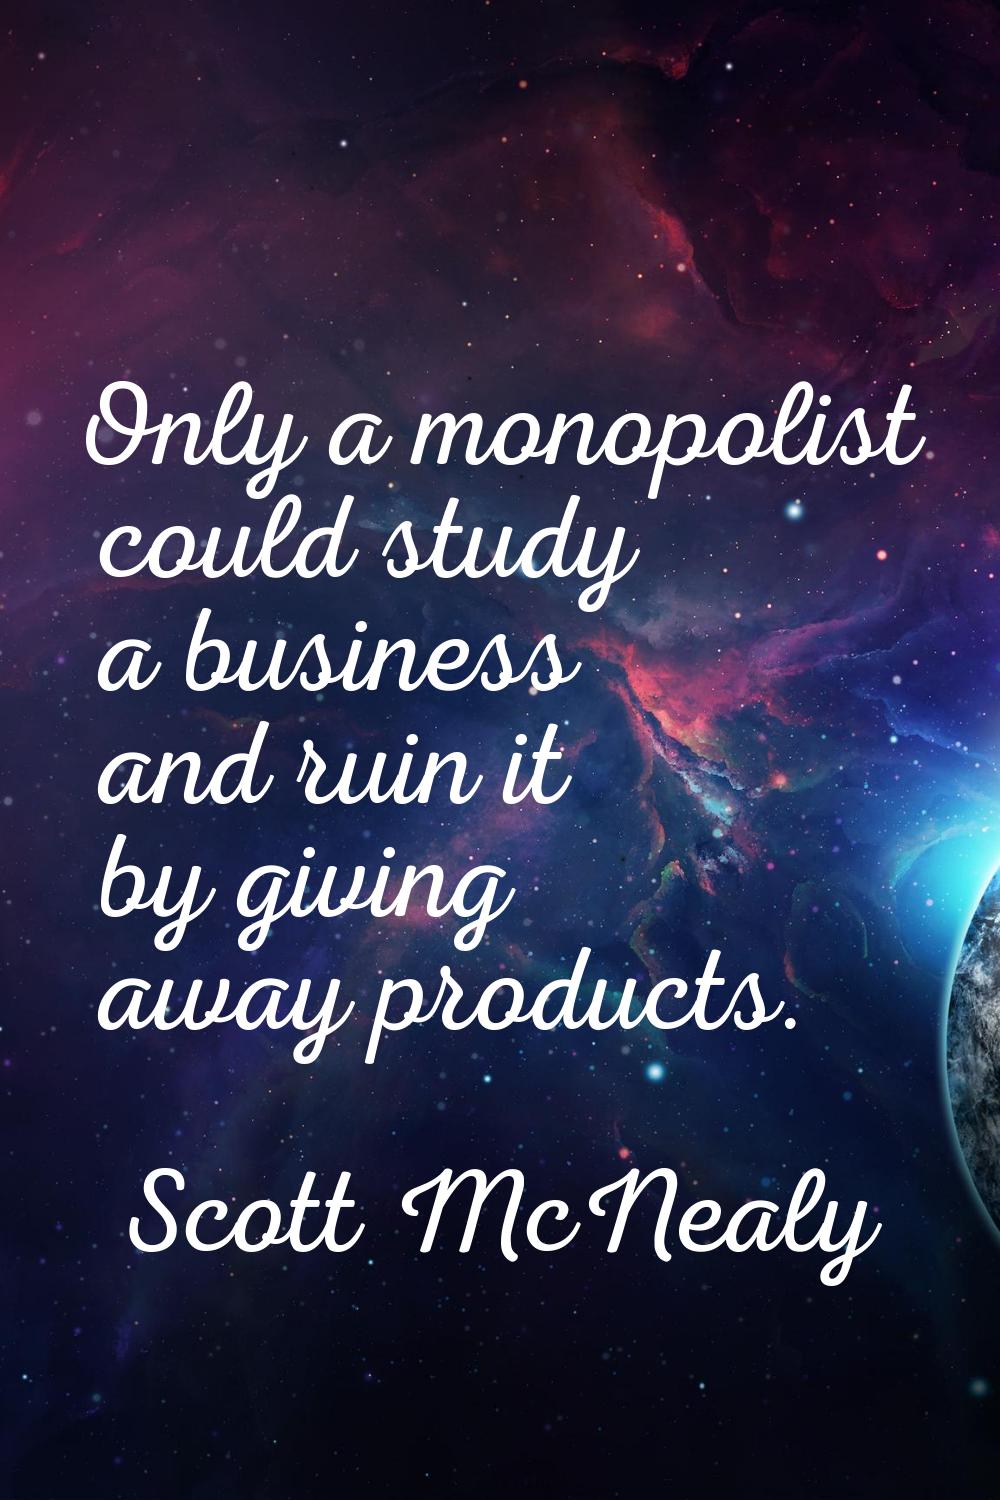 Only a monopolist could study a business and ruin it by giving away products.